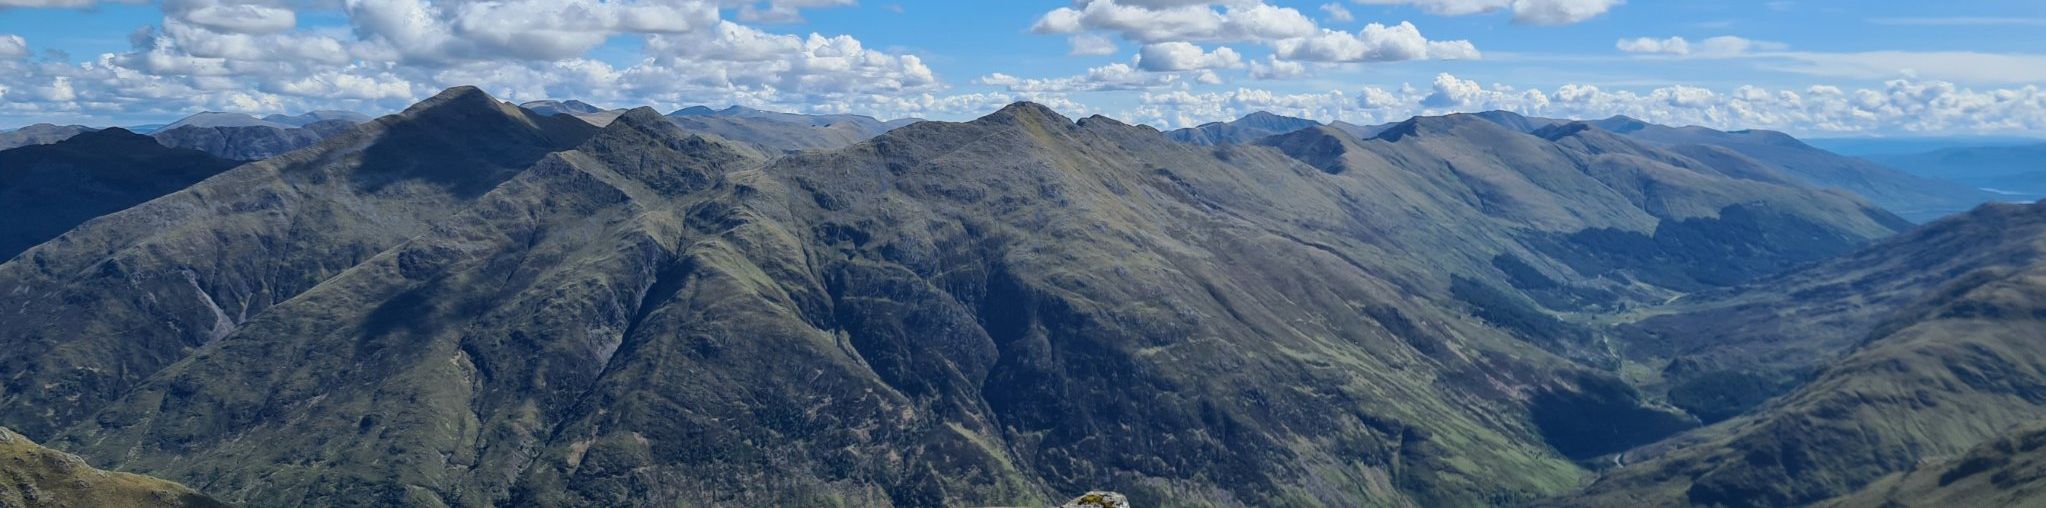 Five Sisters of Kintail from The Saddle